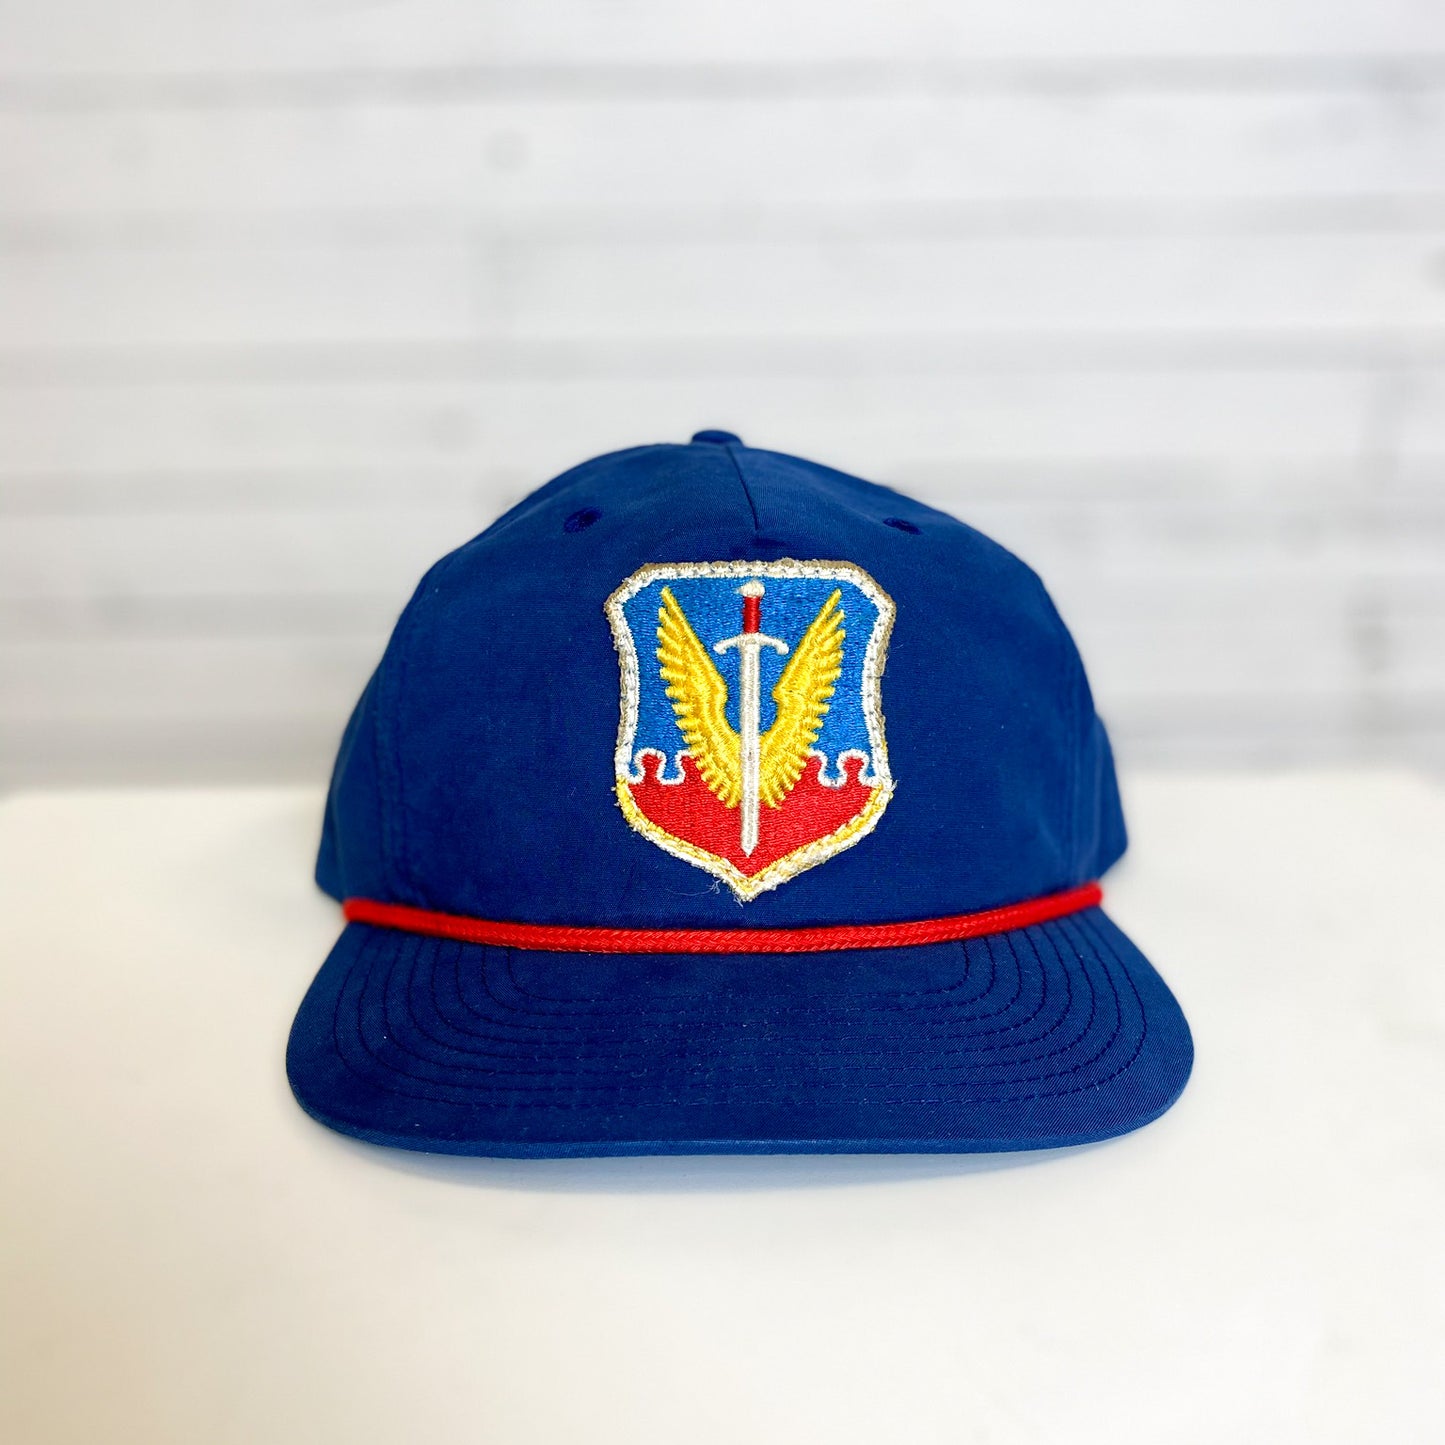 Sword Wings: Vintage Military Patch Navy hat